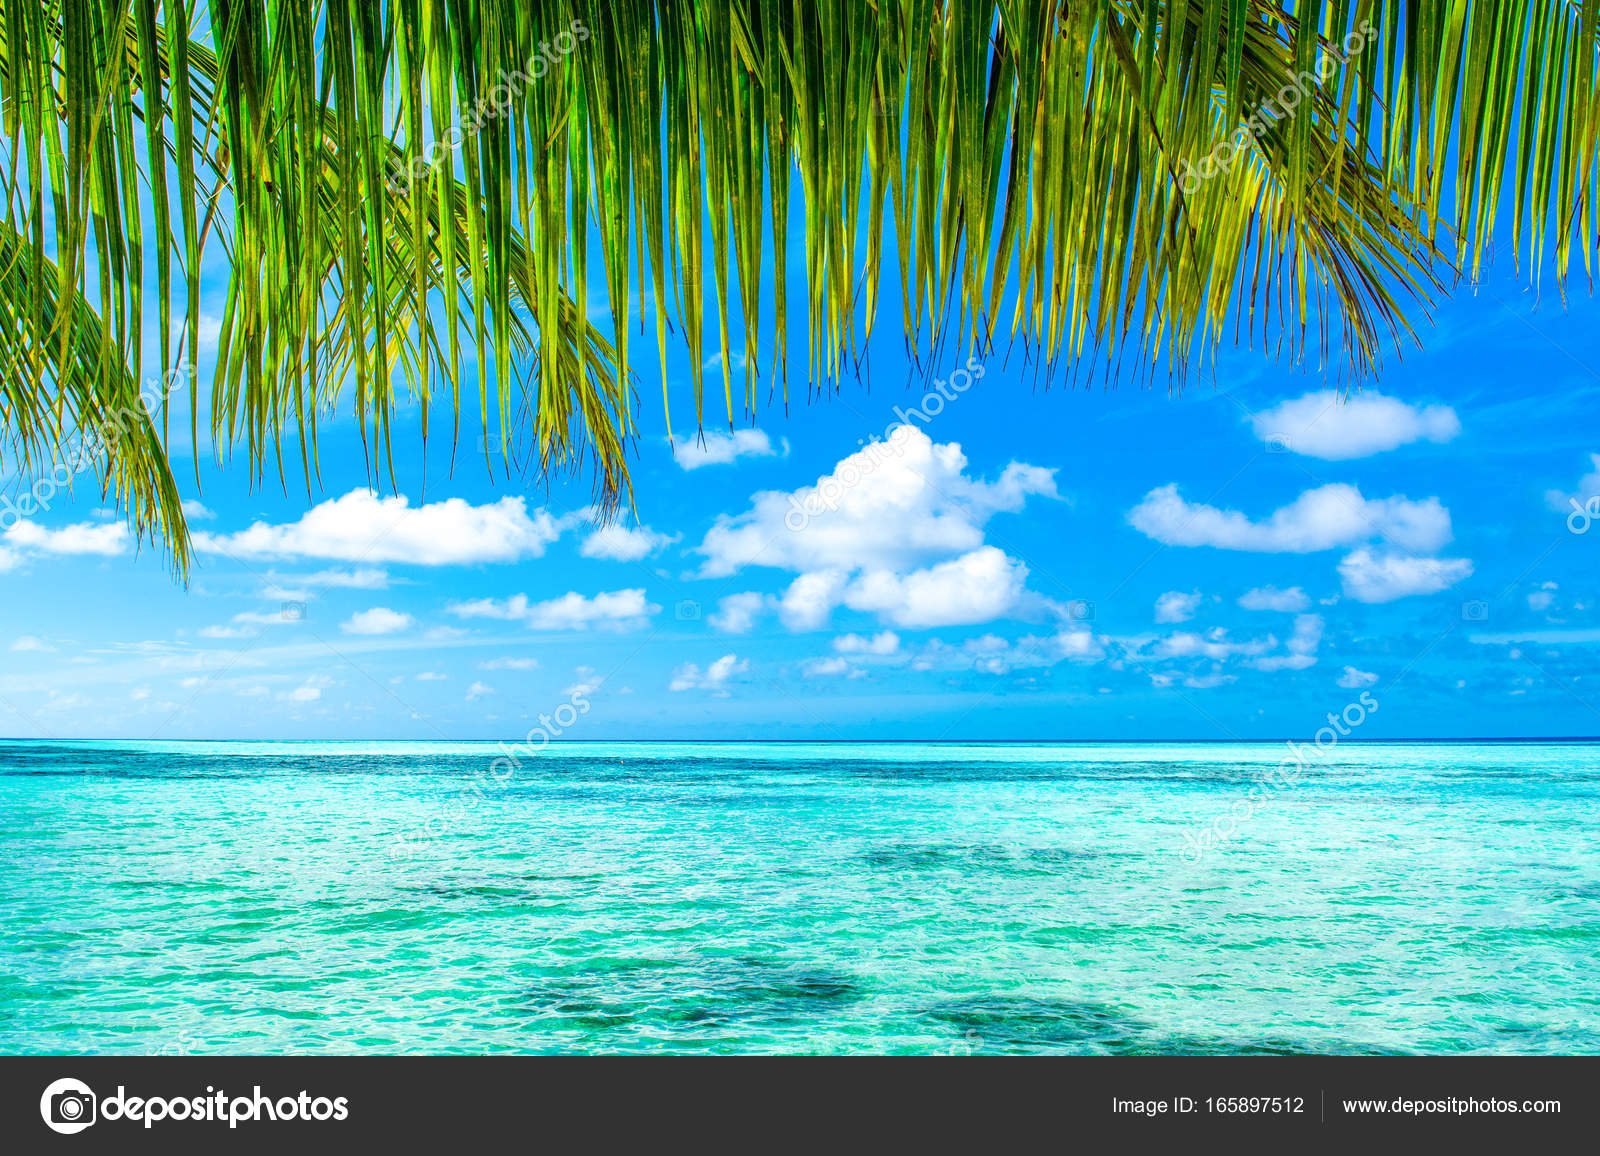 Beautiful Landscape Clear Turquoise Indian Ocean View Branches Palm